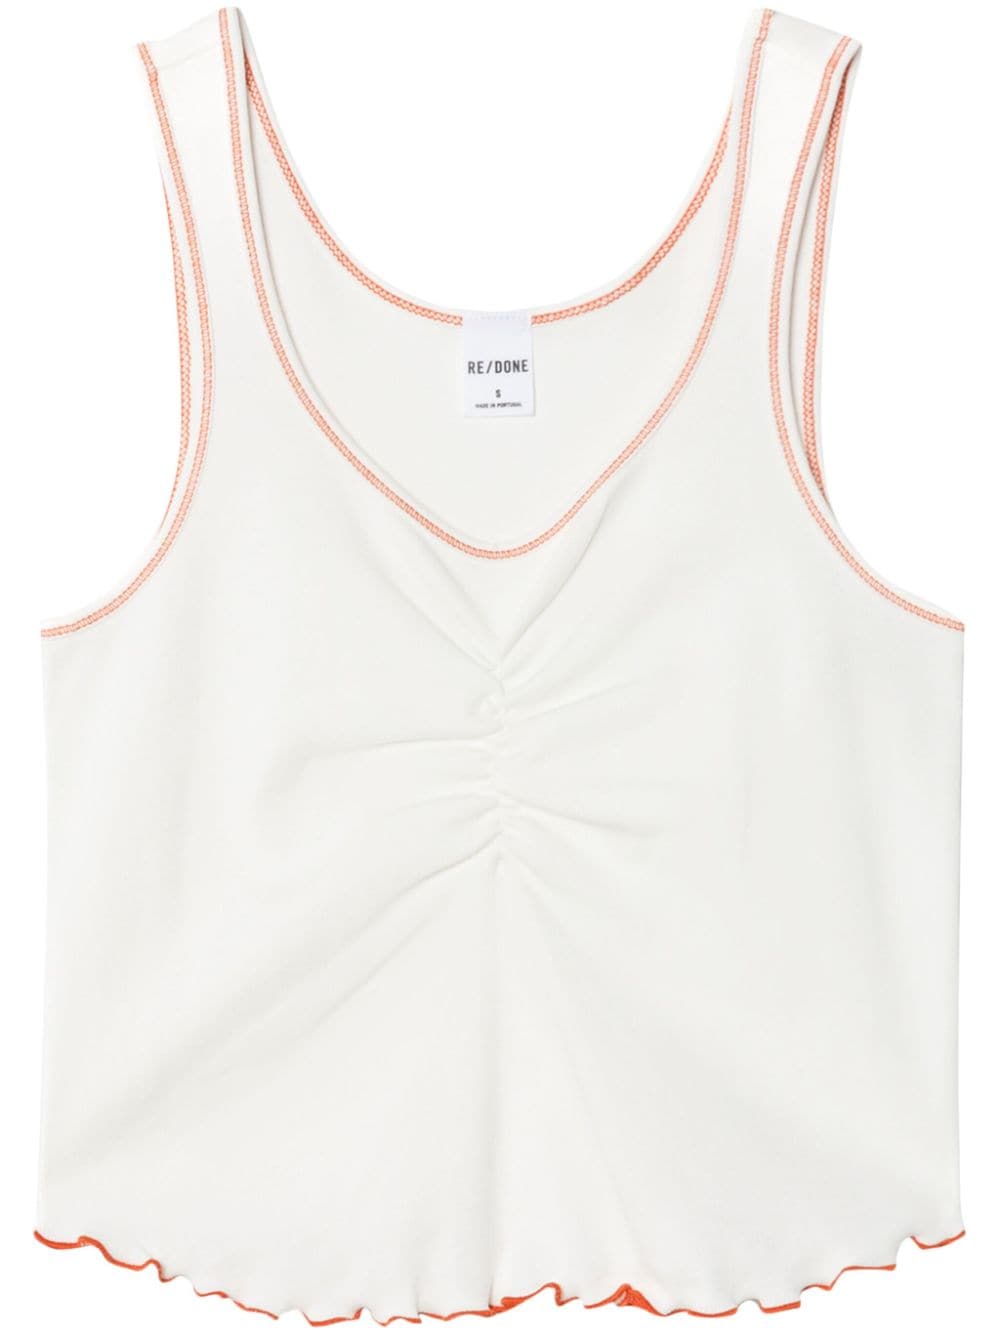 RE/DONE contrasting trim tank top - White von RE/DONE